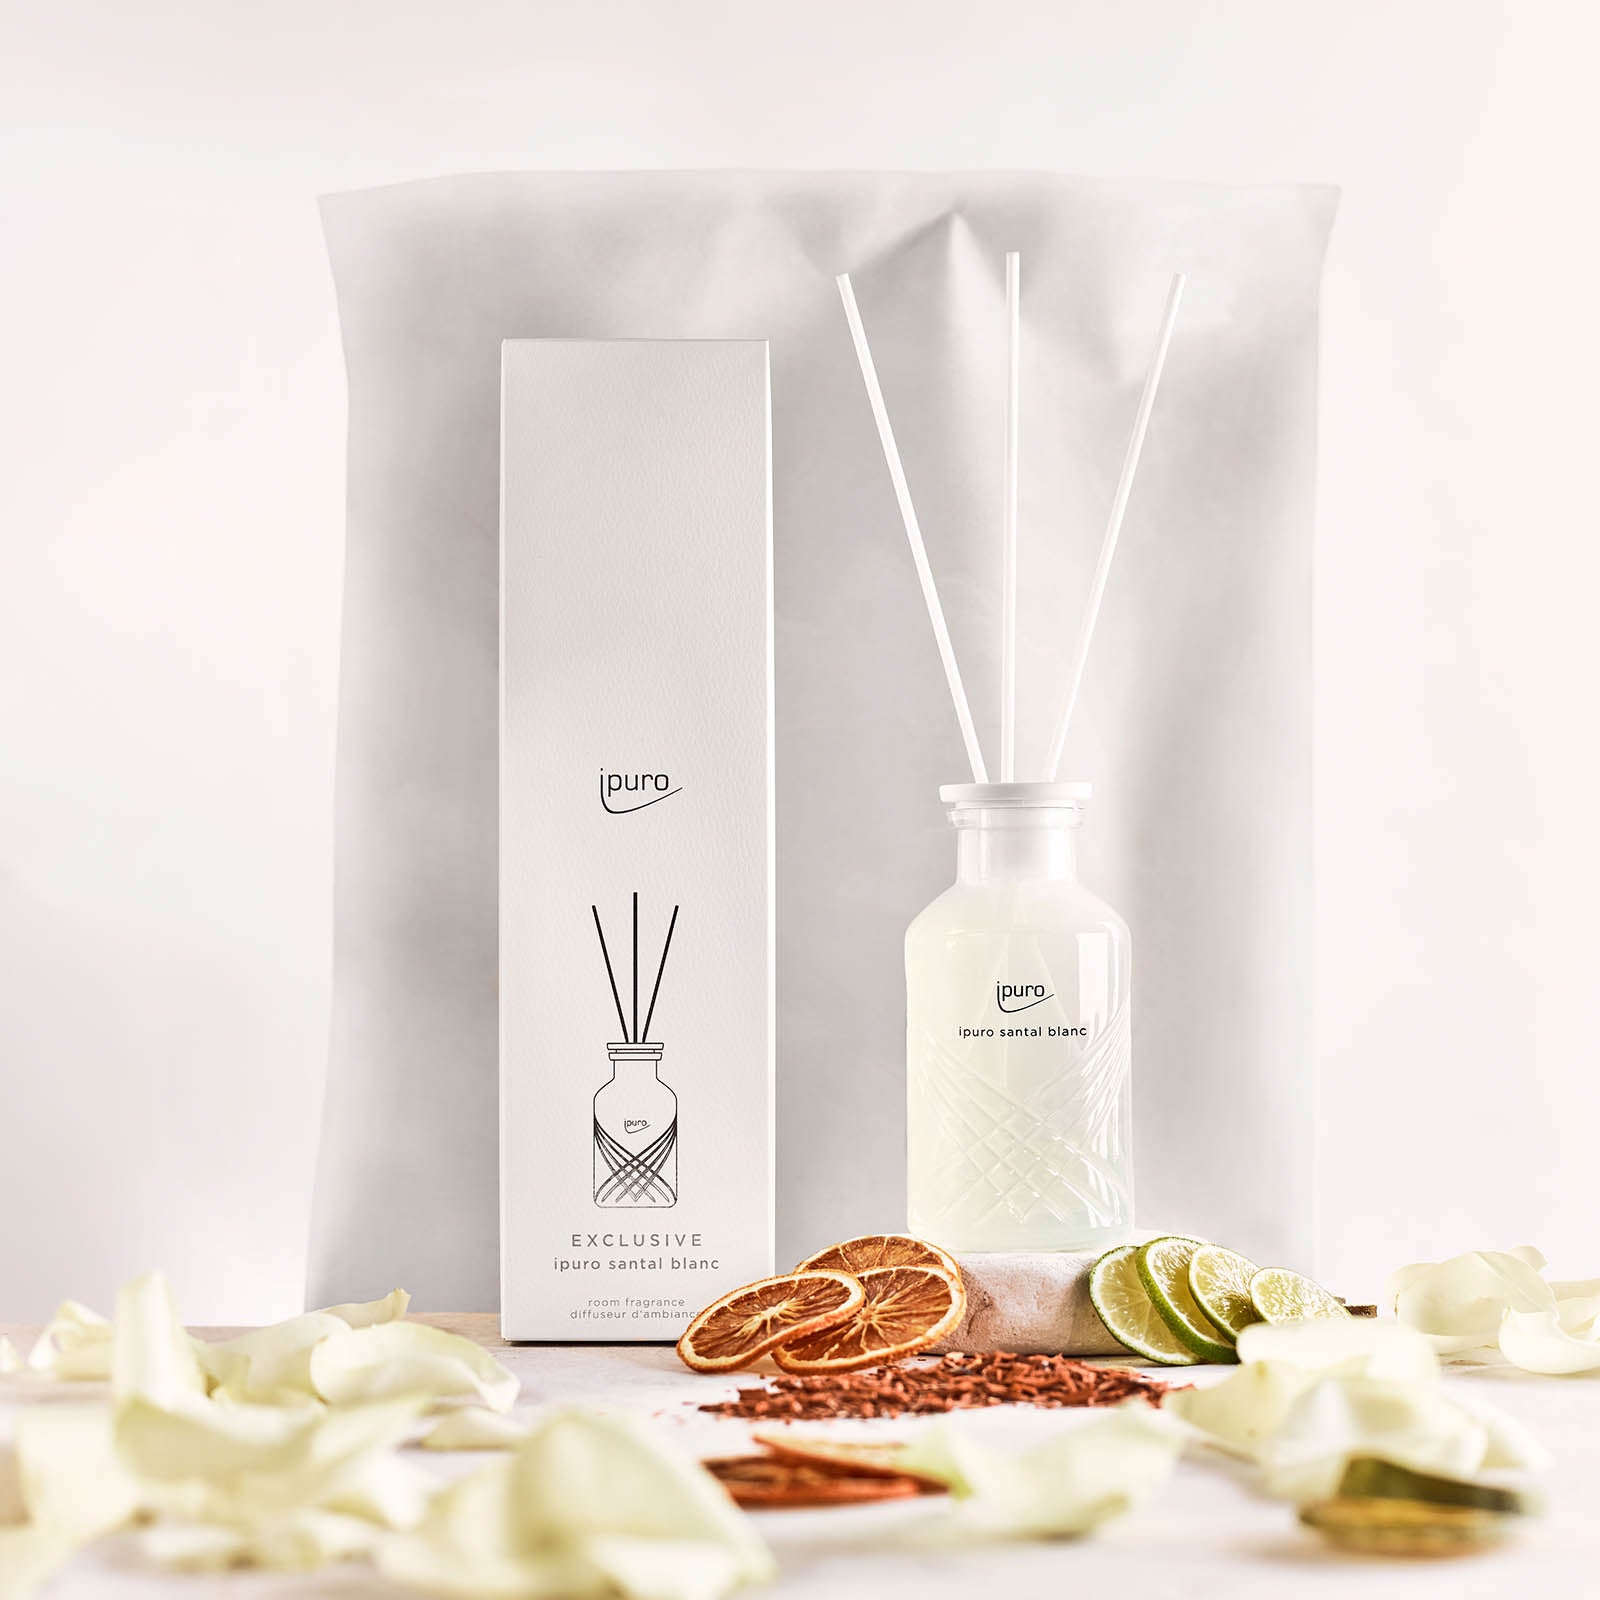 ipuro - Puristic ipuro Santal Blanc Room Fragrance - Subtle Room Freshener  with Fresh Notes and White Orchid - Elegant Air Freshener in the Home for a